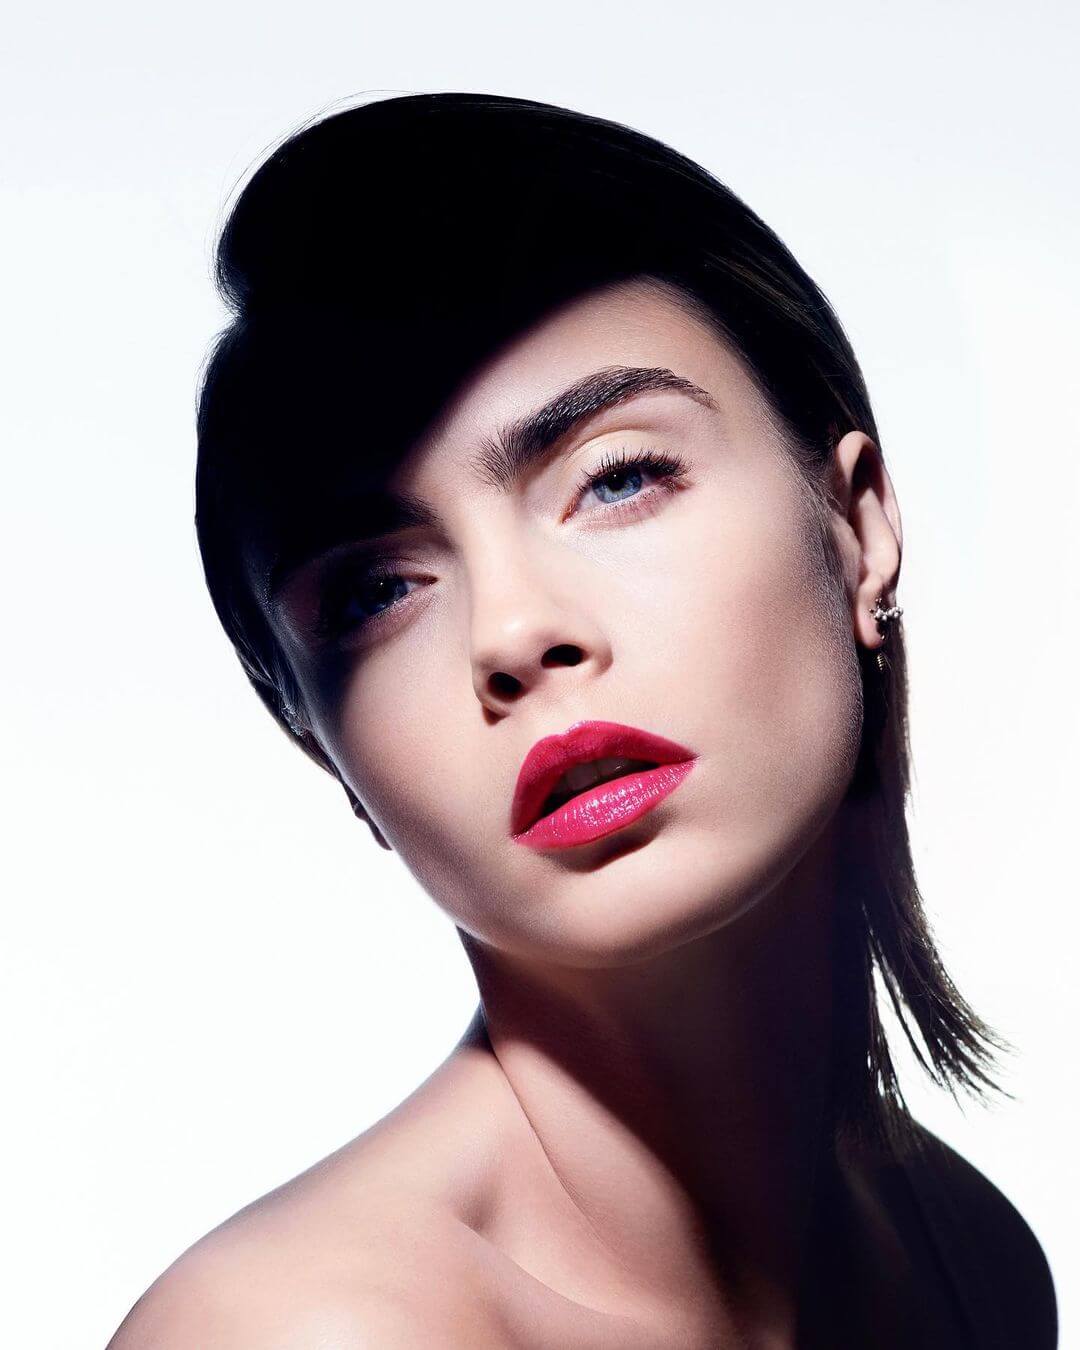 "Cara Delevingne's Glam Transformation: The Hunt for The Perfect Pink Lipstick"